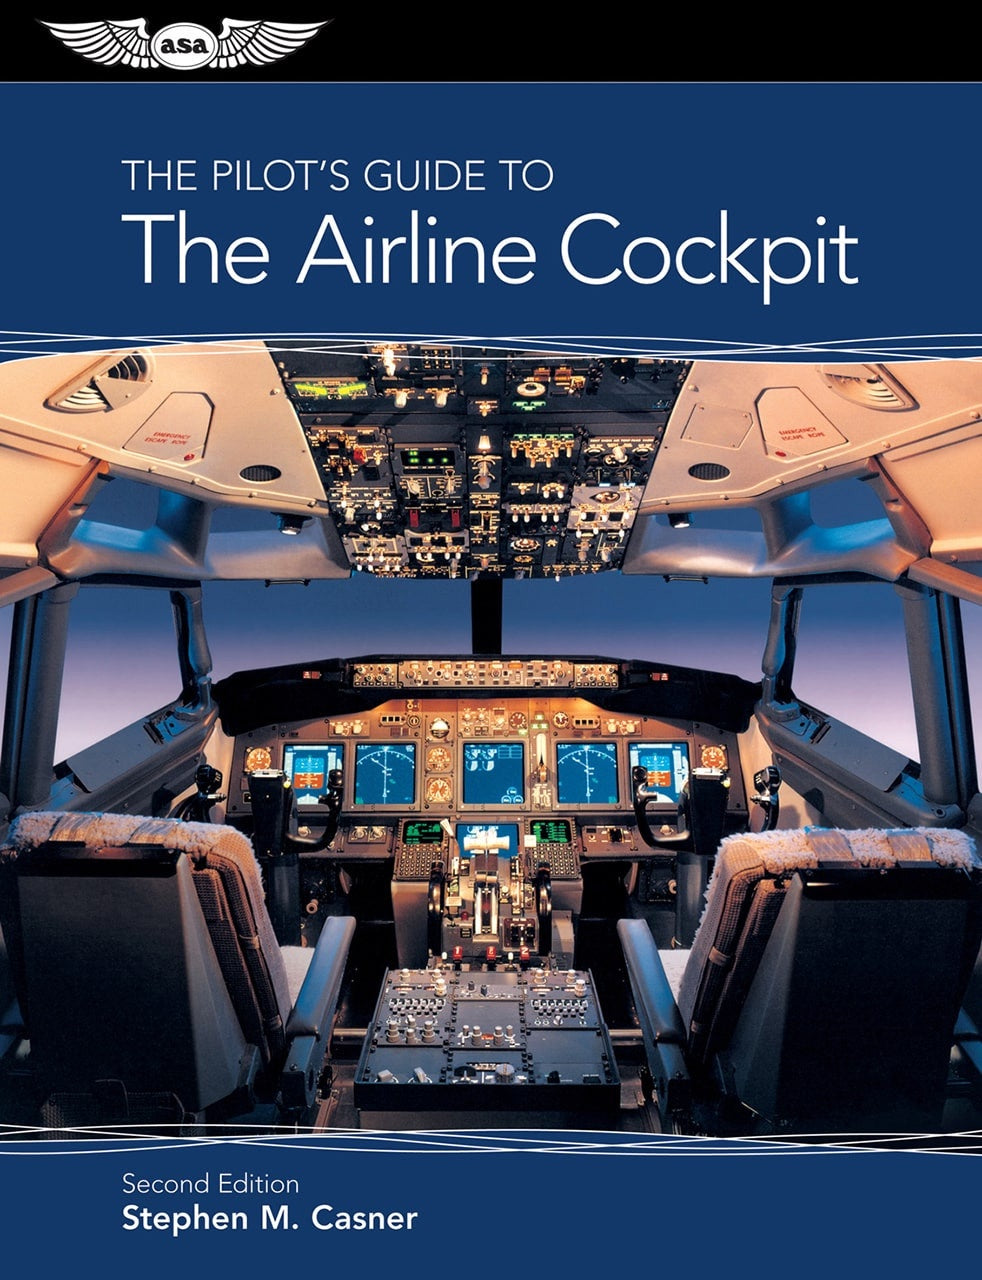 The Pilot’s Guide to The Airline Cockpit